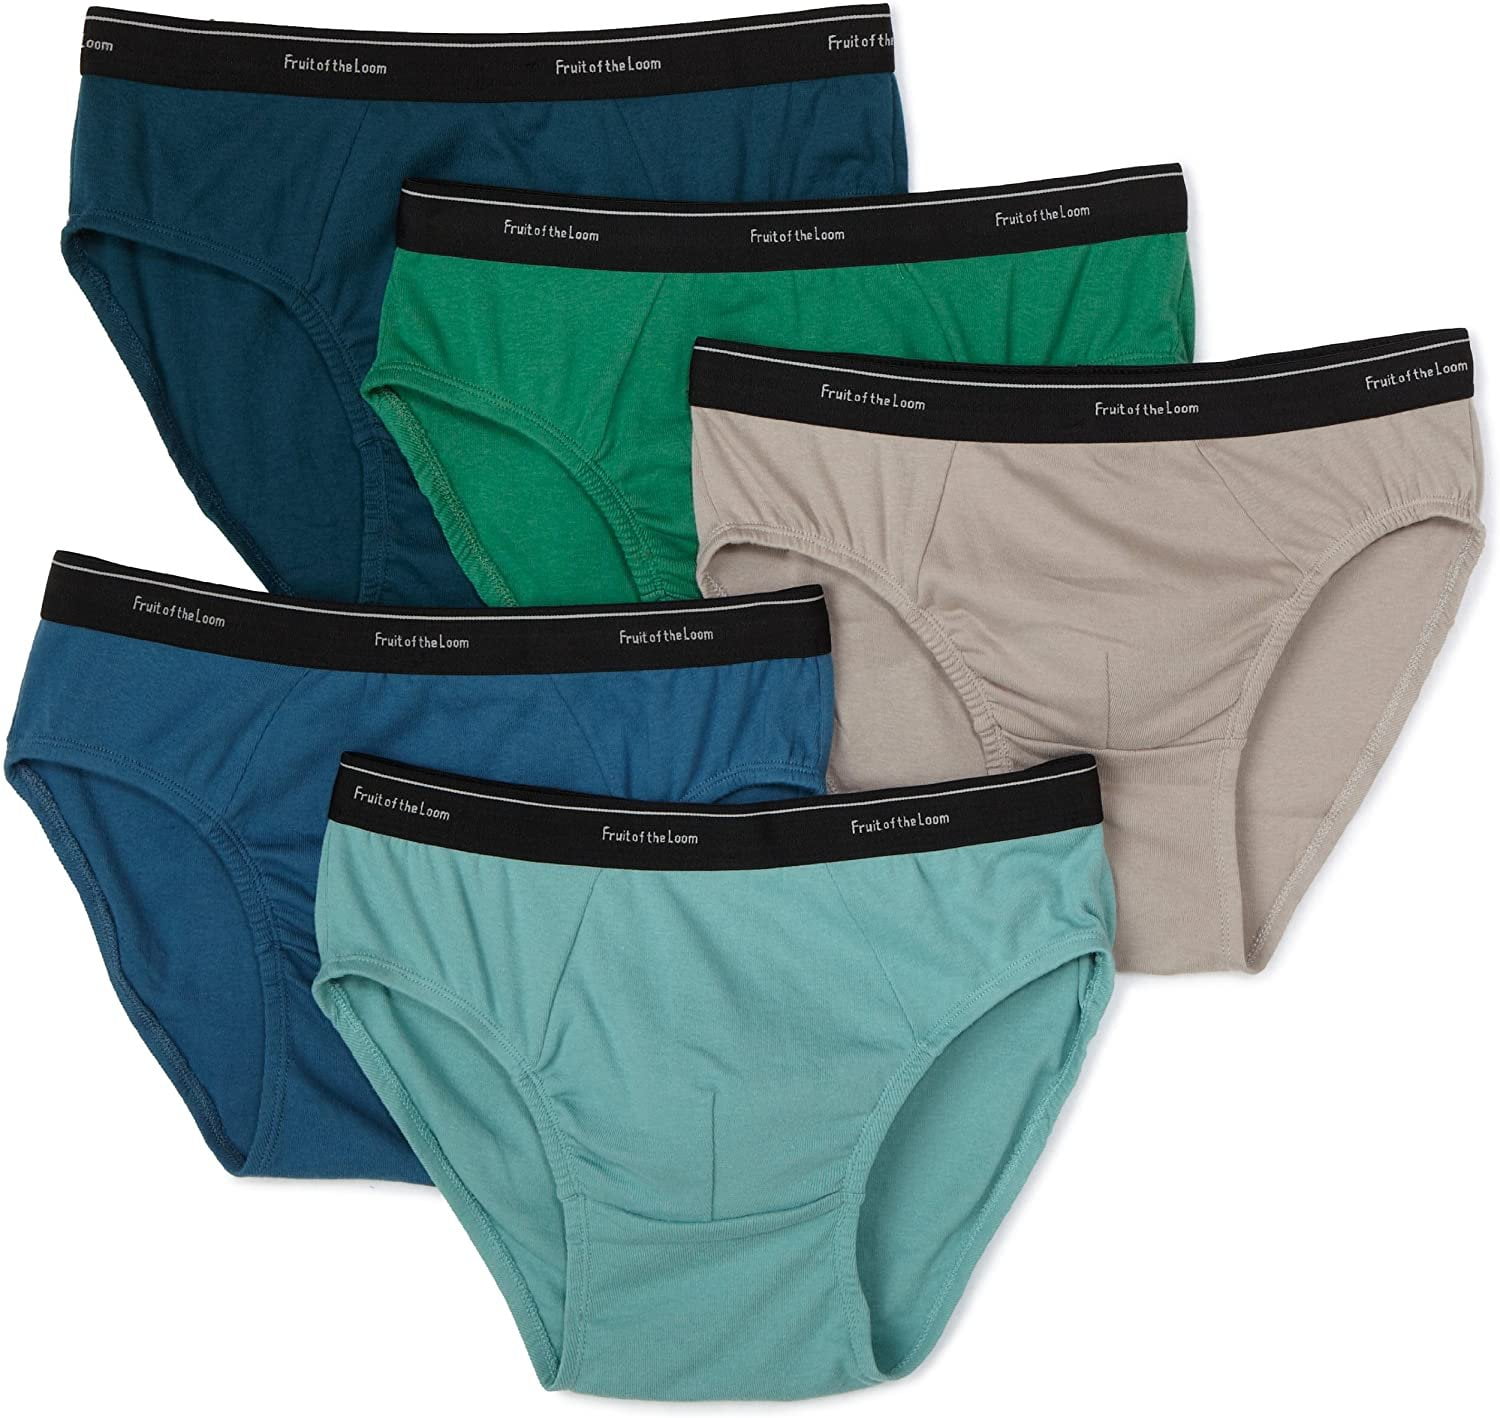 Fruit of The Loom Men's Tag Free Assorted Low Rise Briefs - Walmart.com